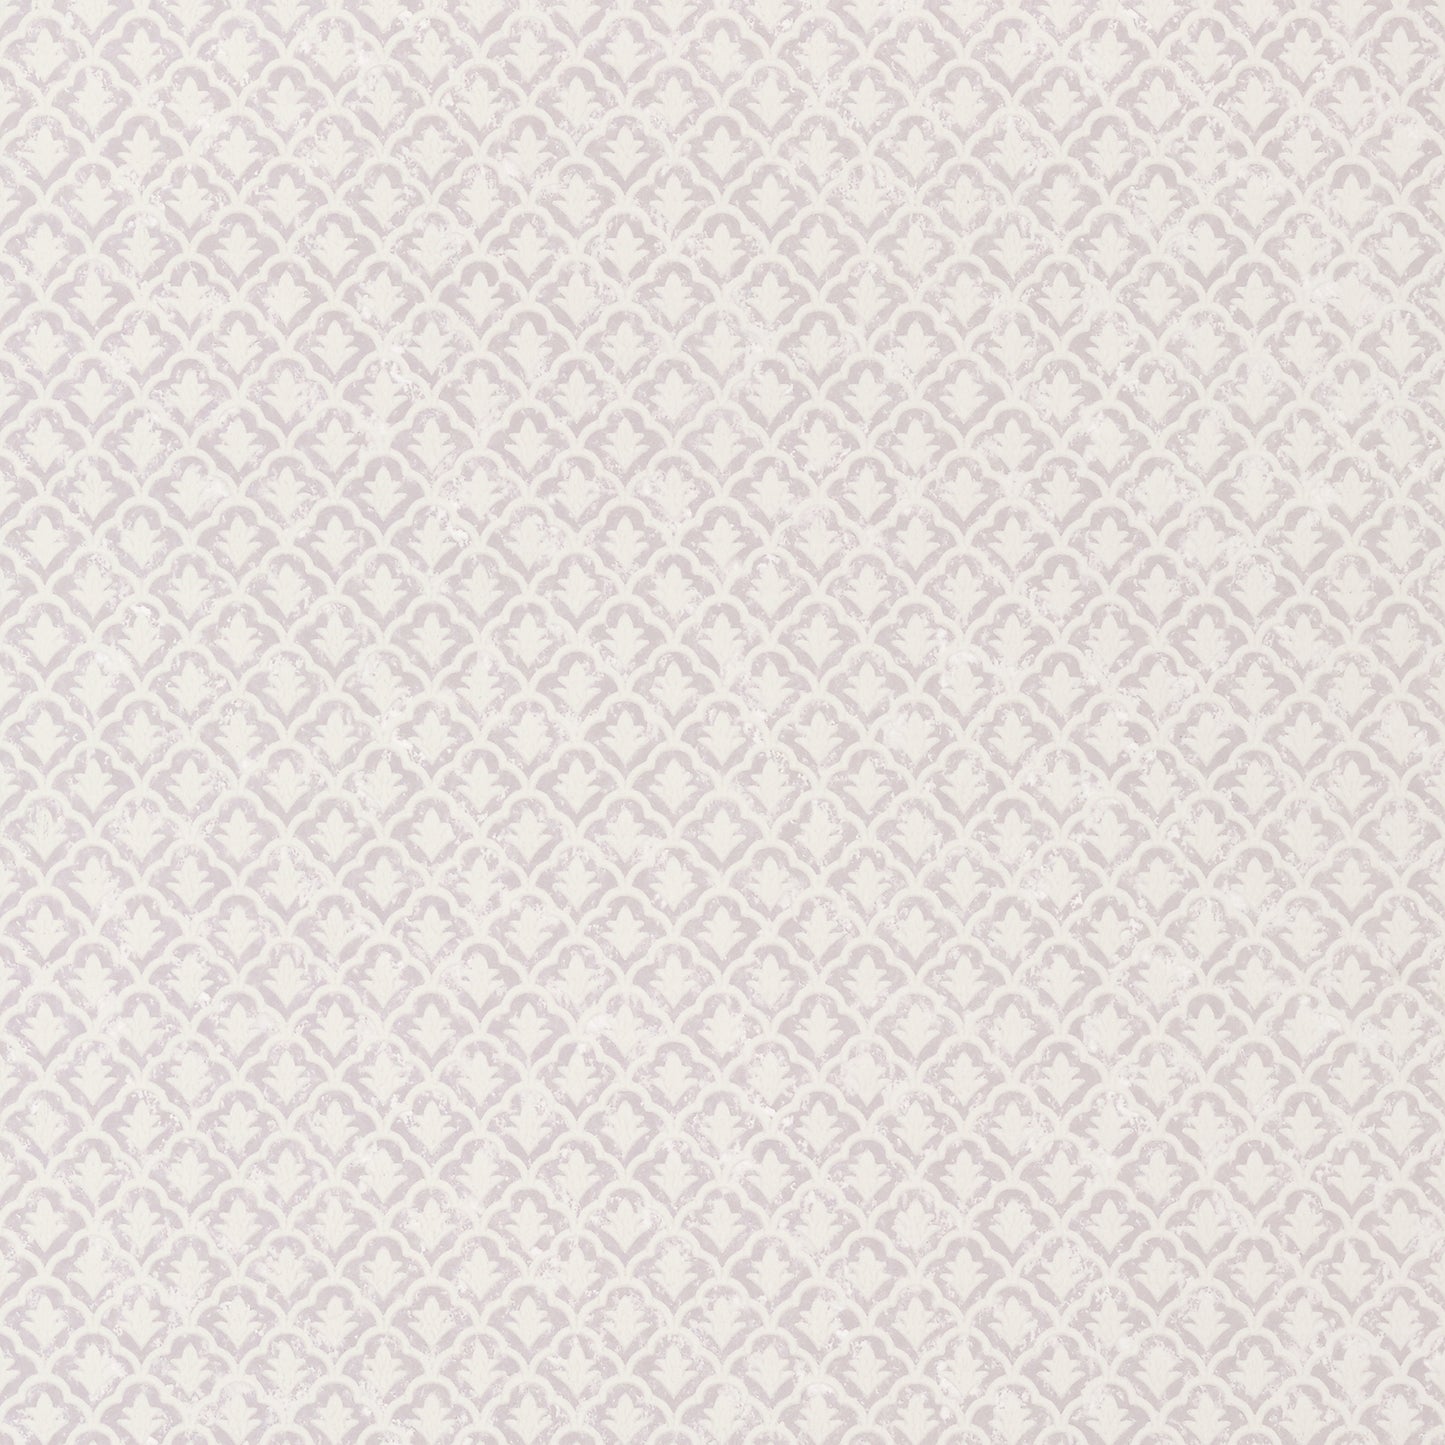 Purchase  Ann French Wallpaper Product# AT79139 pattern name  Fairfield